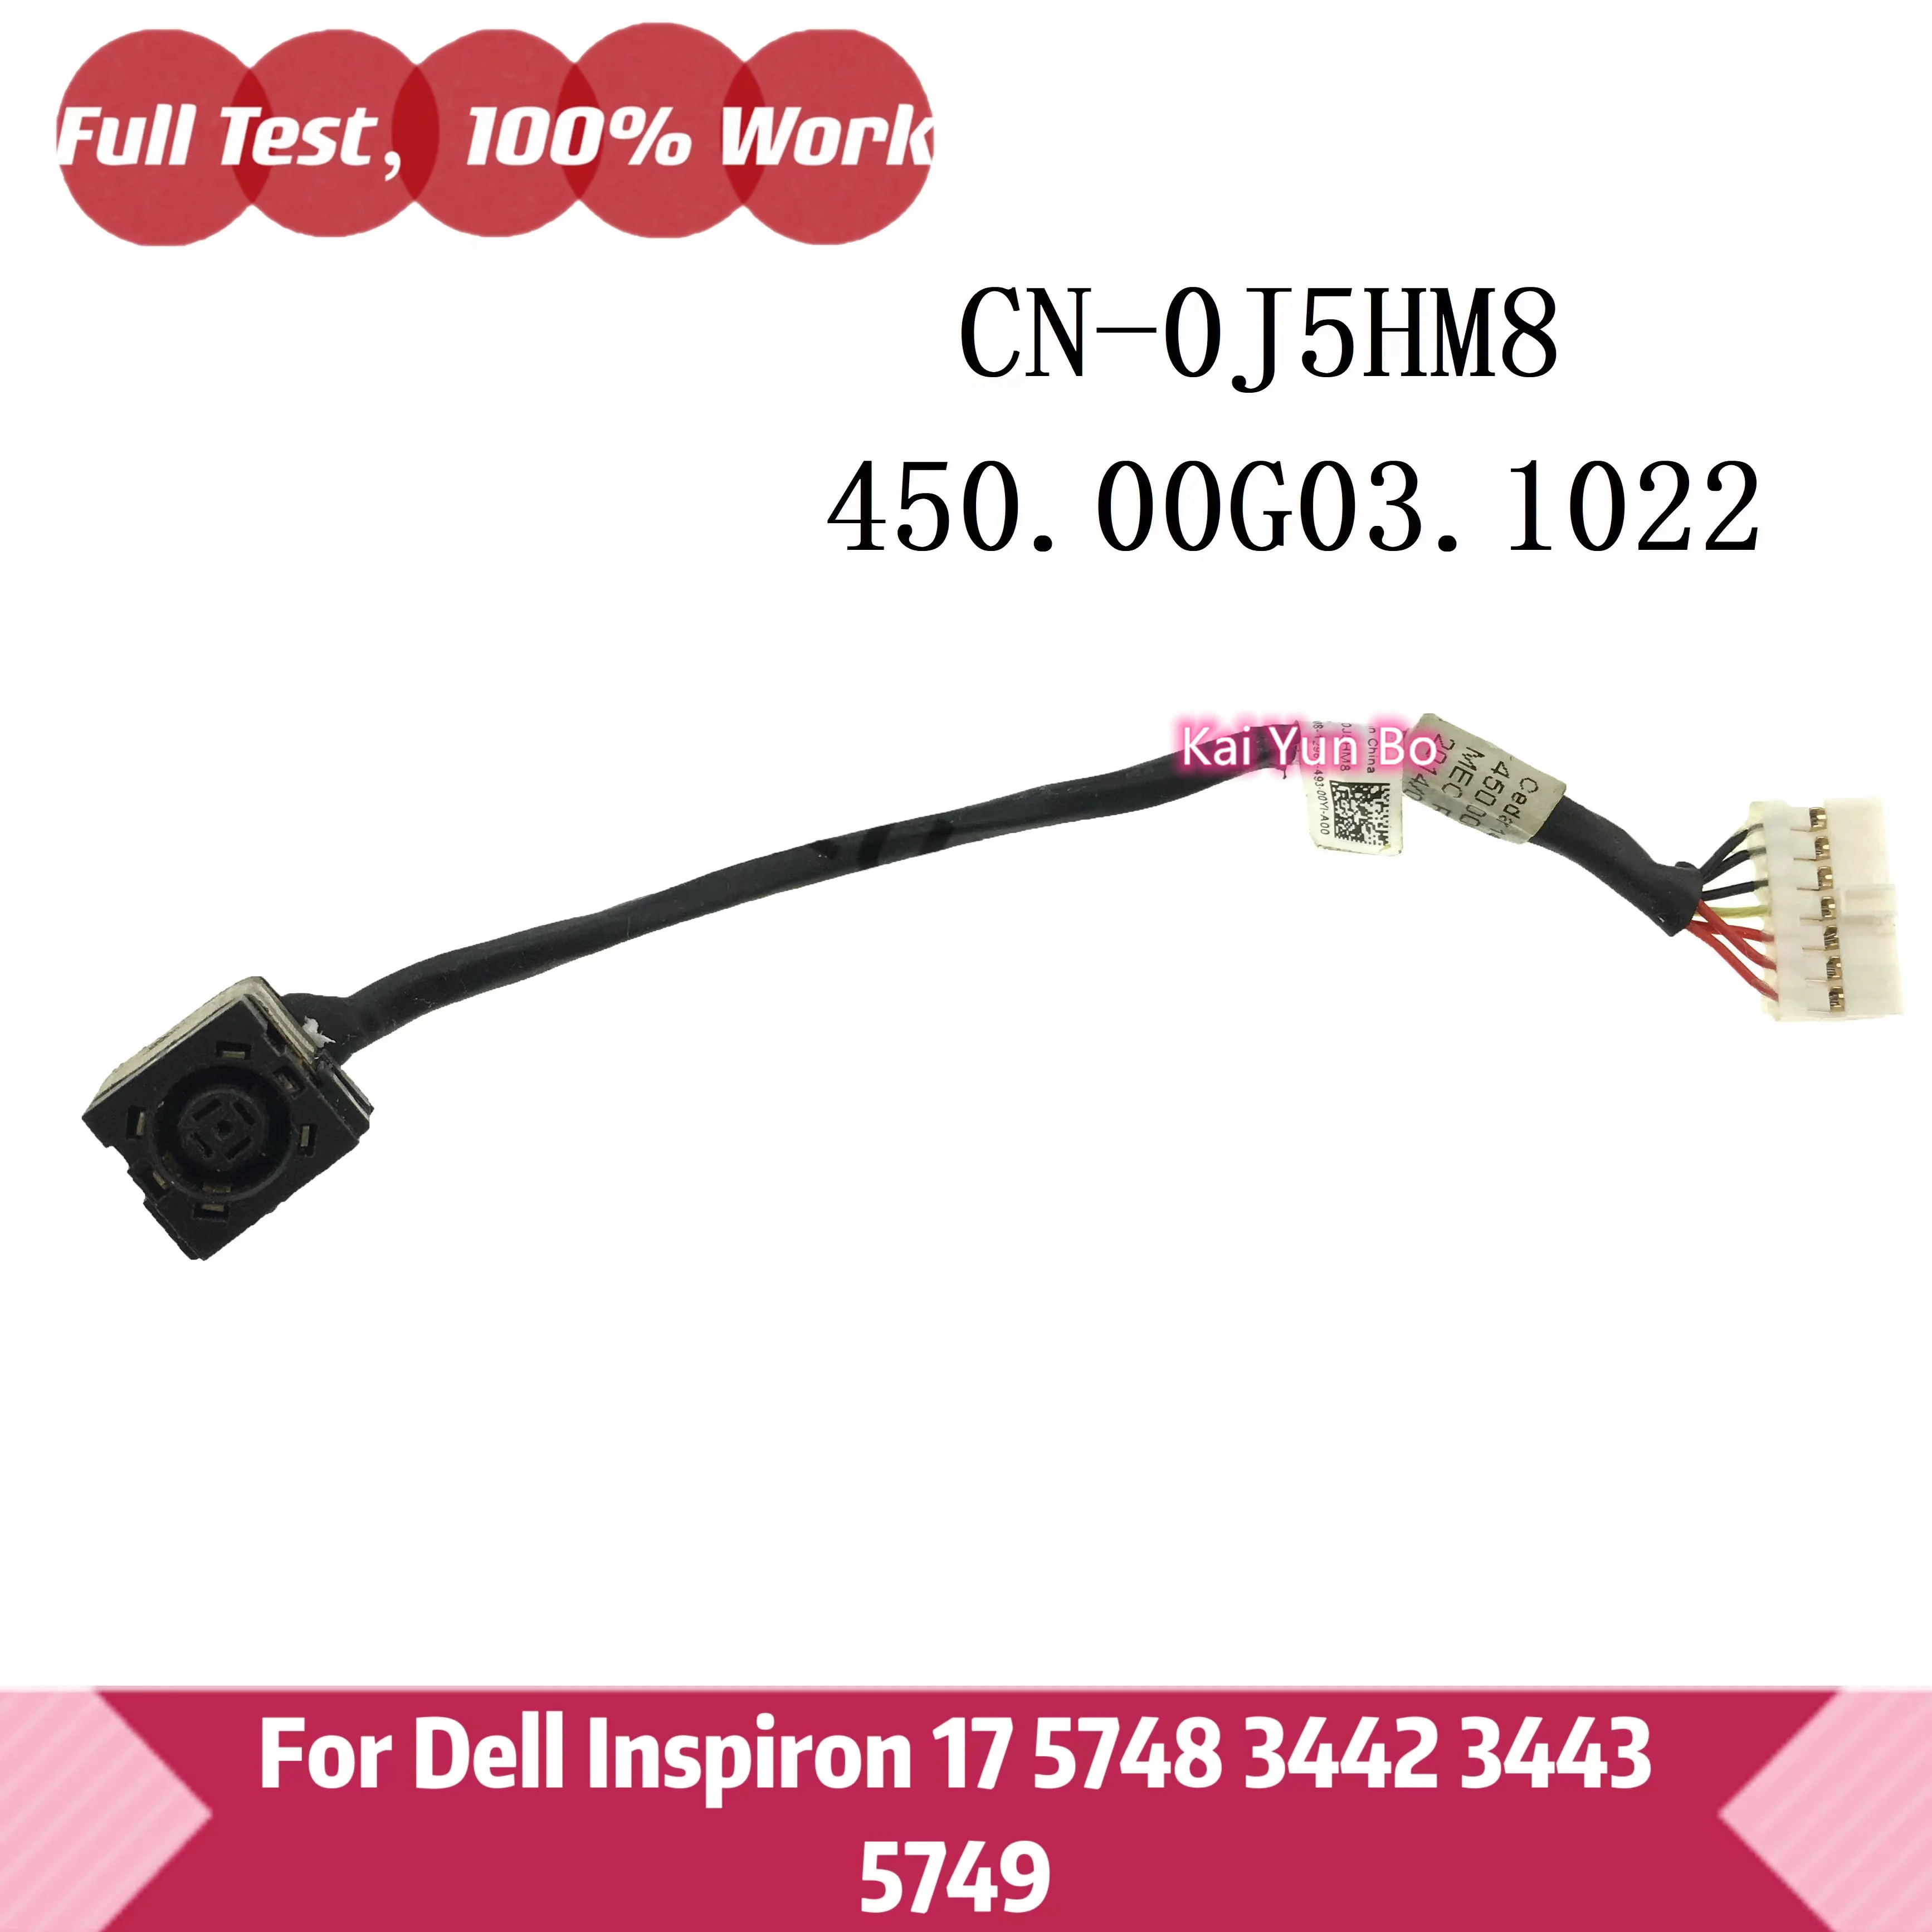 

DC JACK POWER CABLE fits For Dell Inspiron 17 5748 5749 3442 3443 J5HM8 0J5HM8 CN-0J5HM8 450.00G03.0001 450.00G03.1022